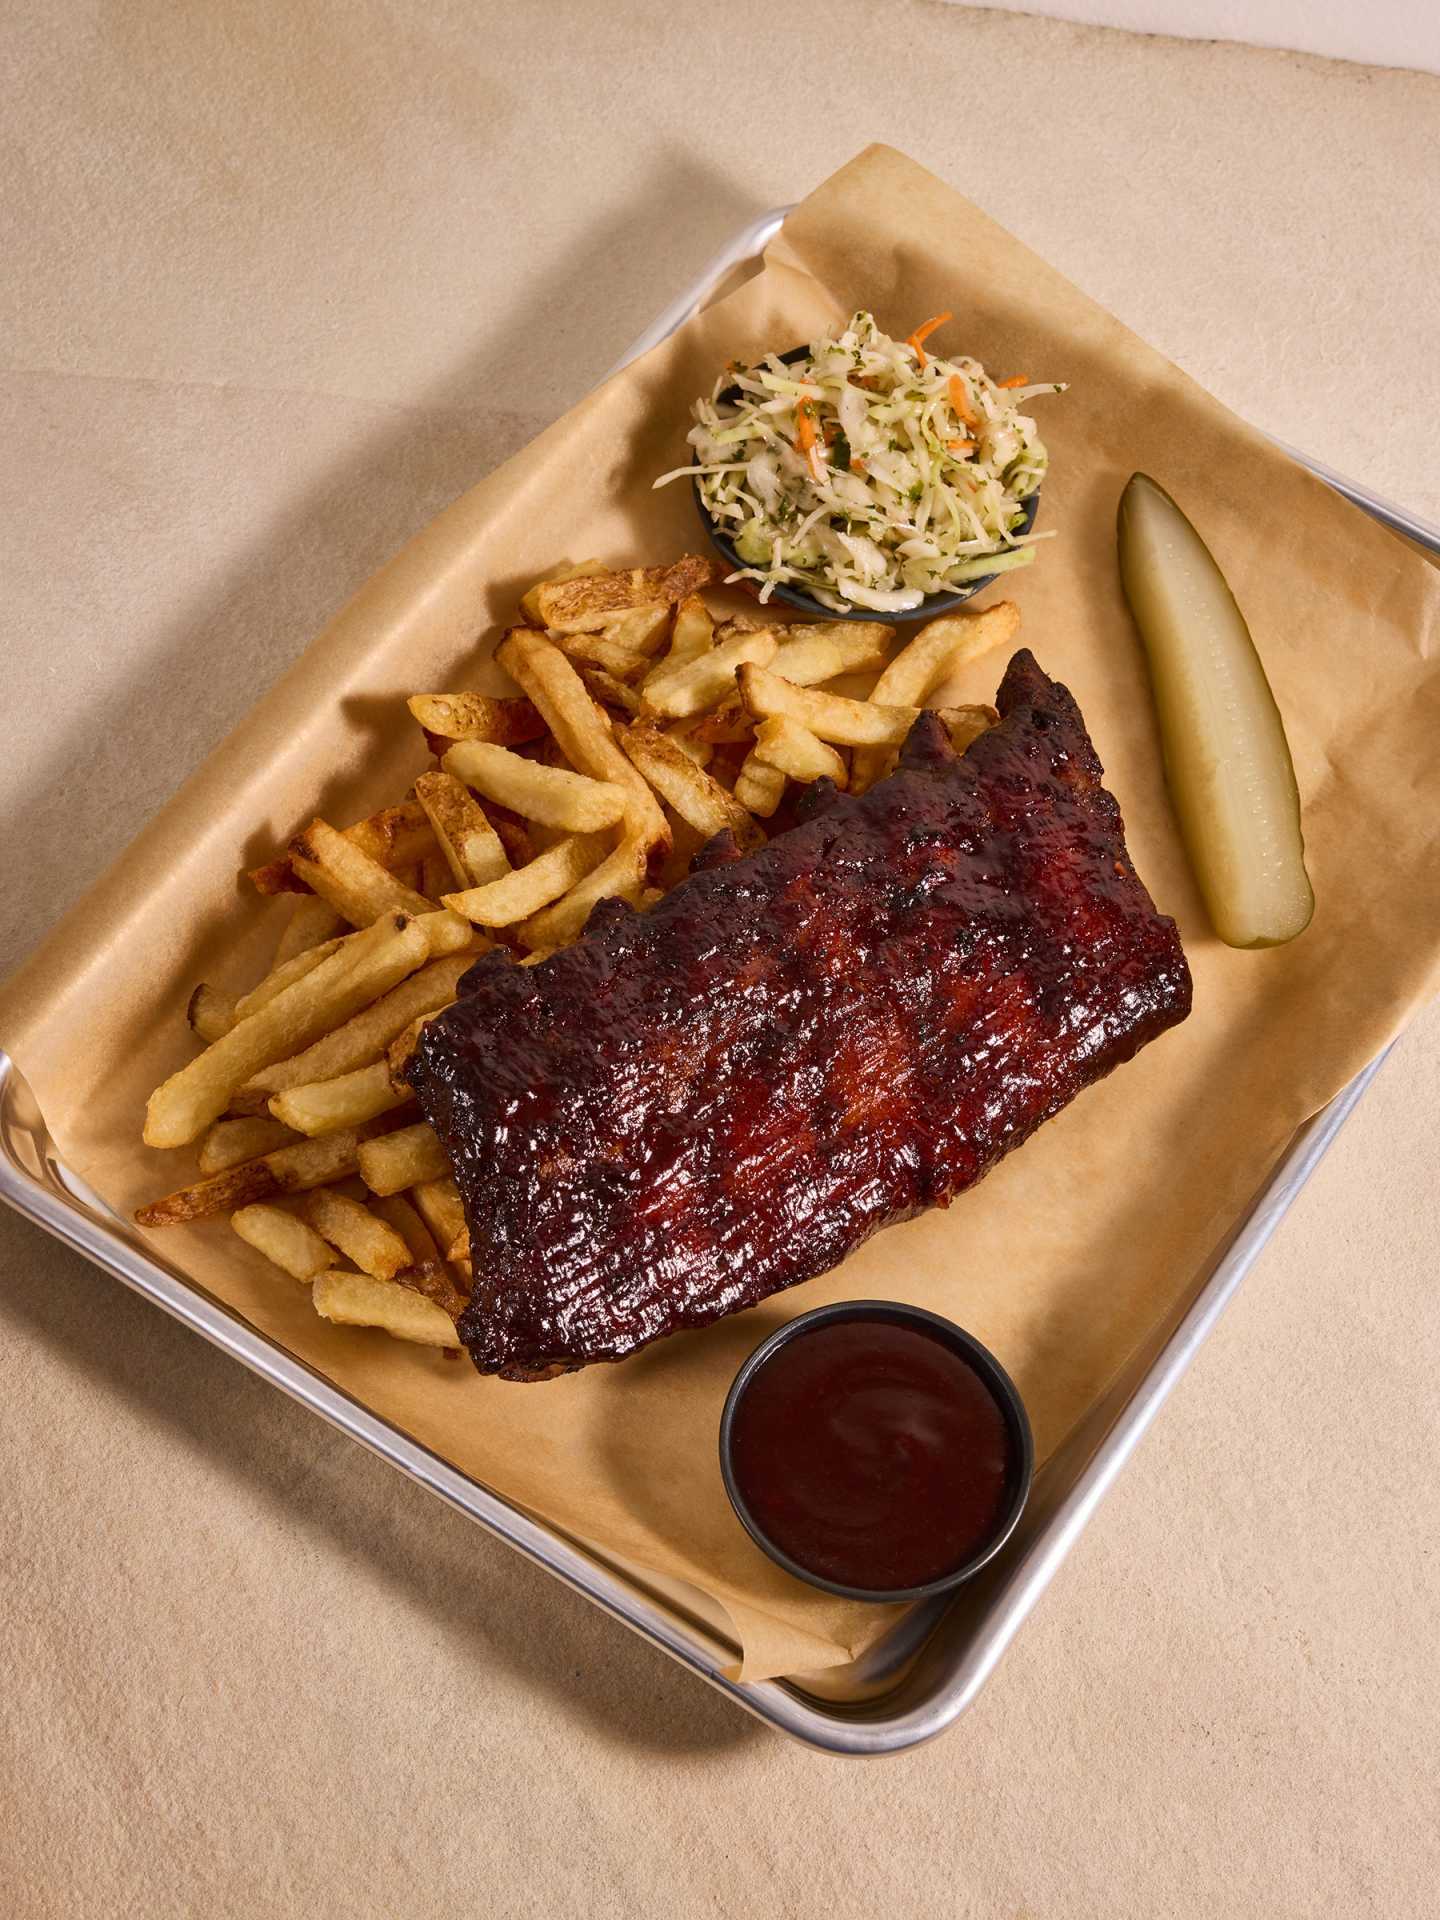 Best new Toronto restaurants | Ribs from Dave's Genuine Deli in Waterworks Food Hall